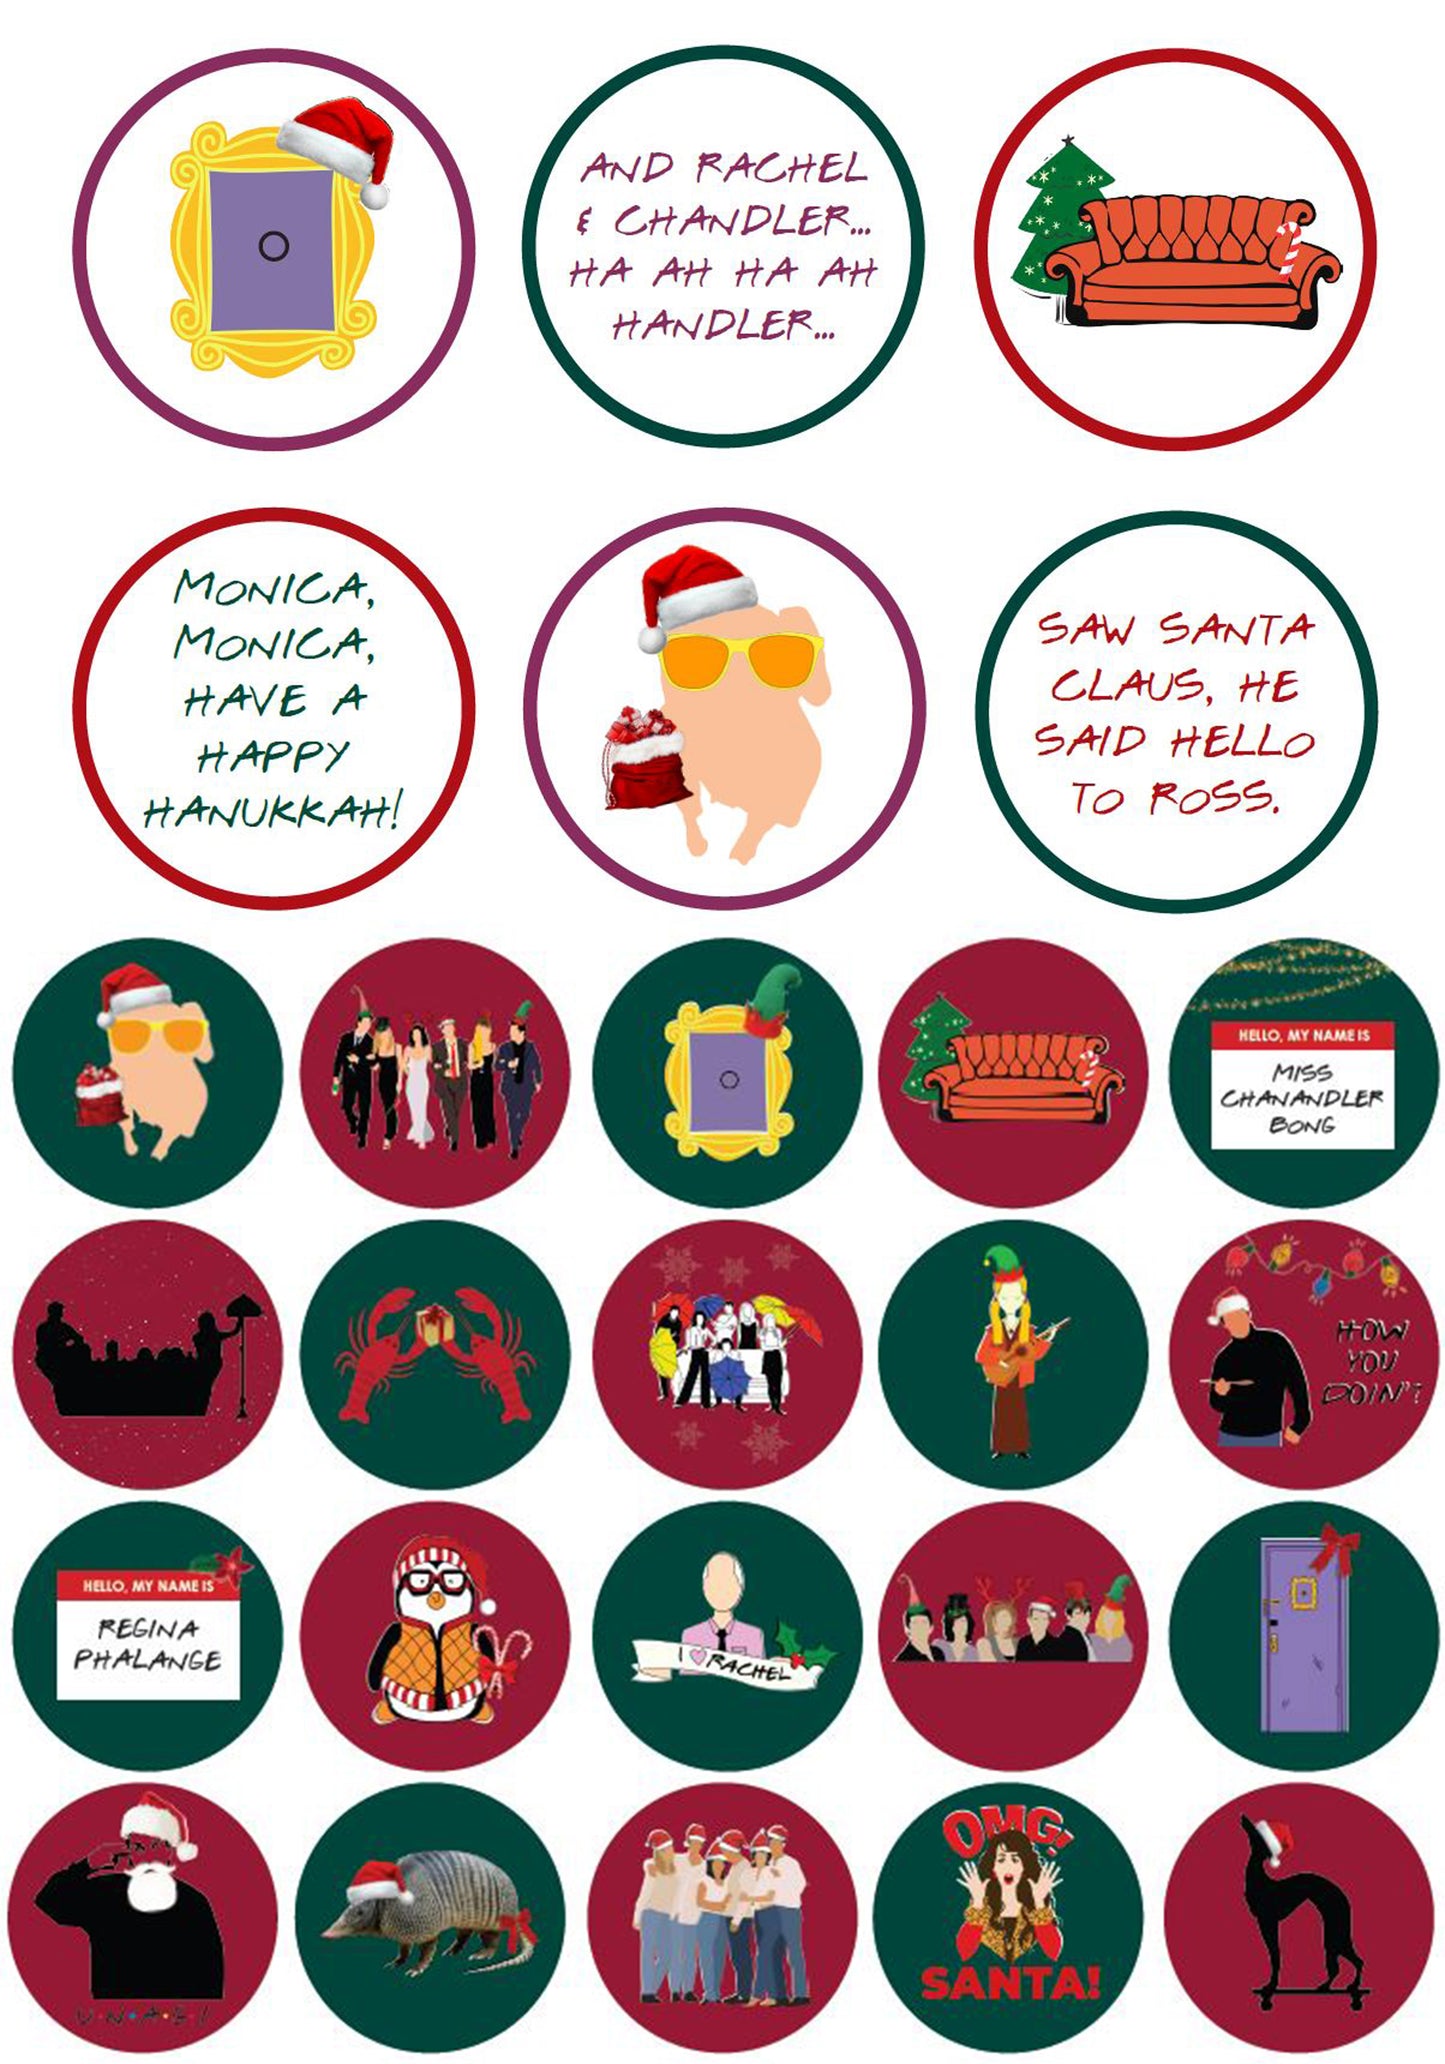 The Ultimate Friends Holiday Party Printable Package